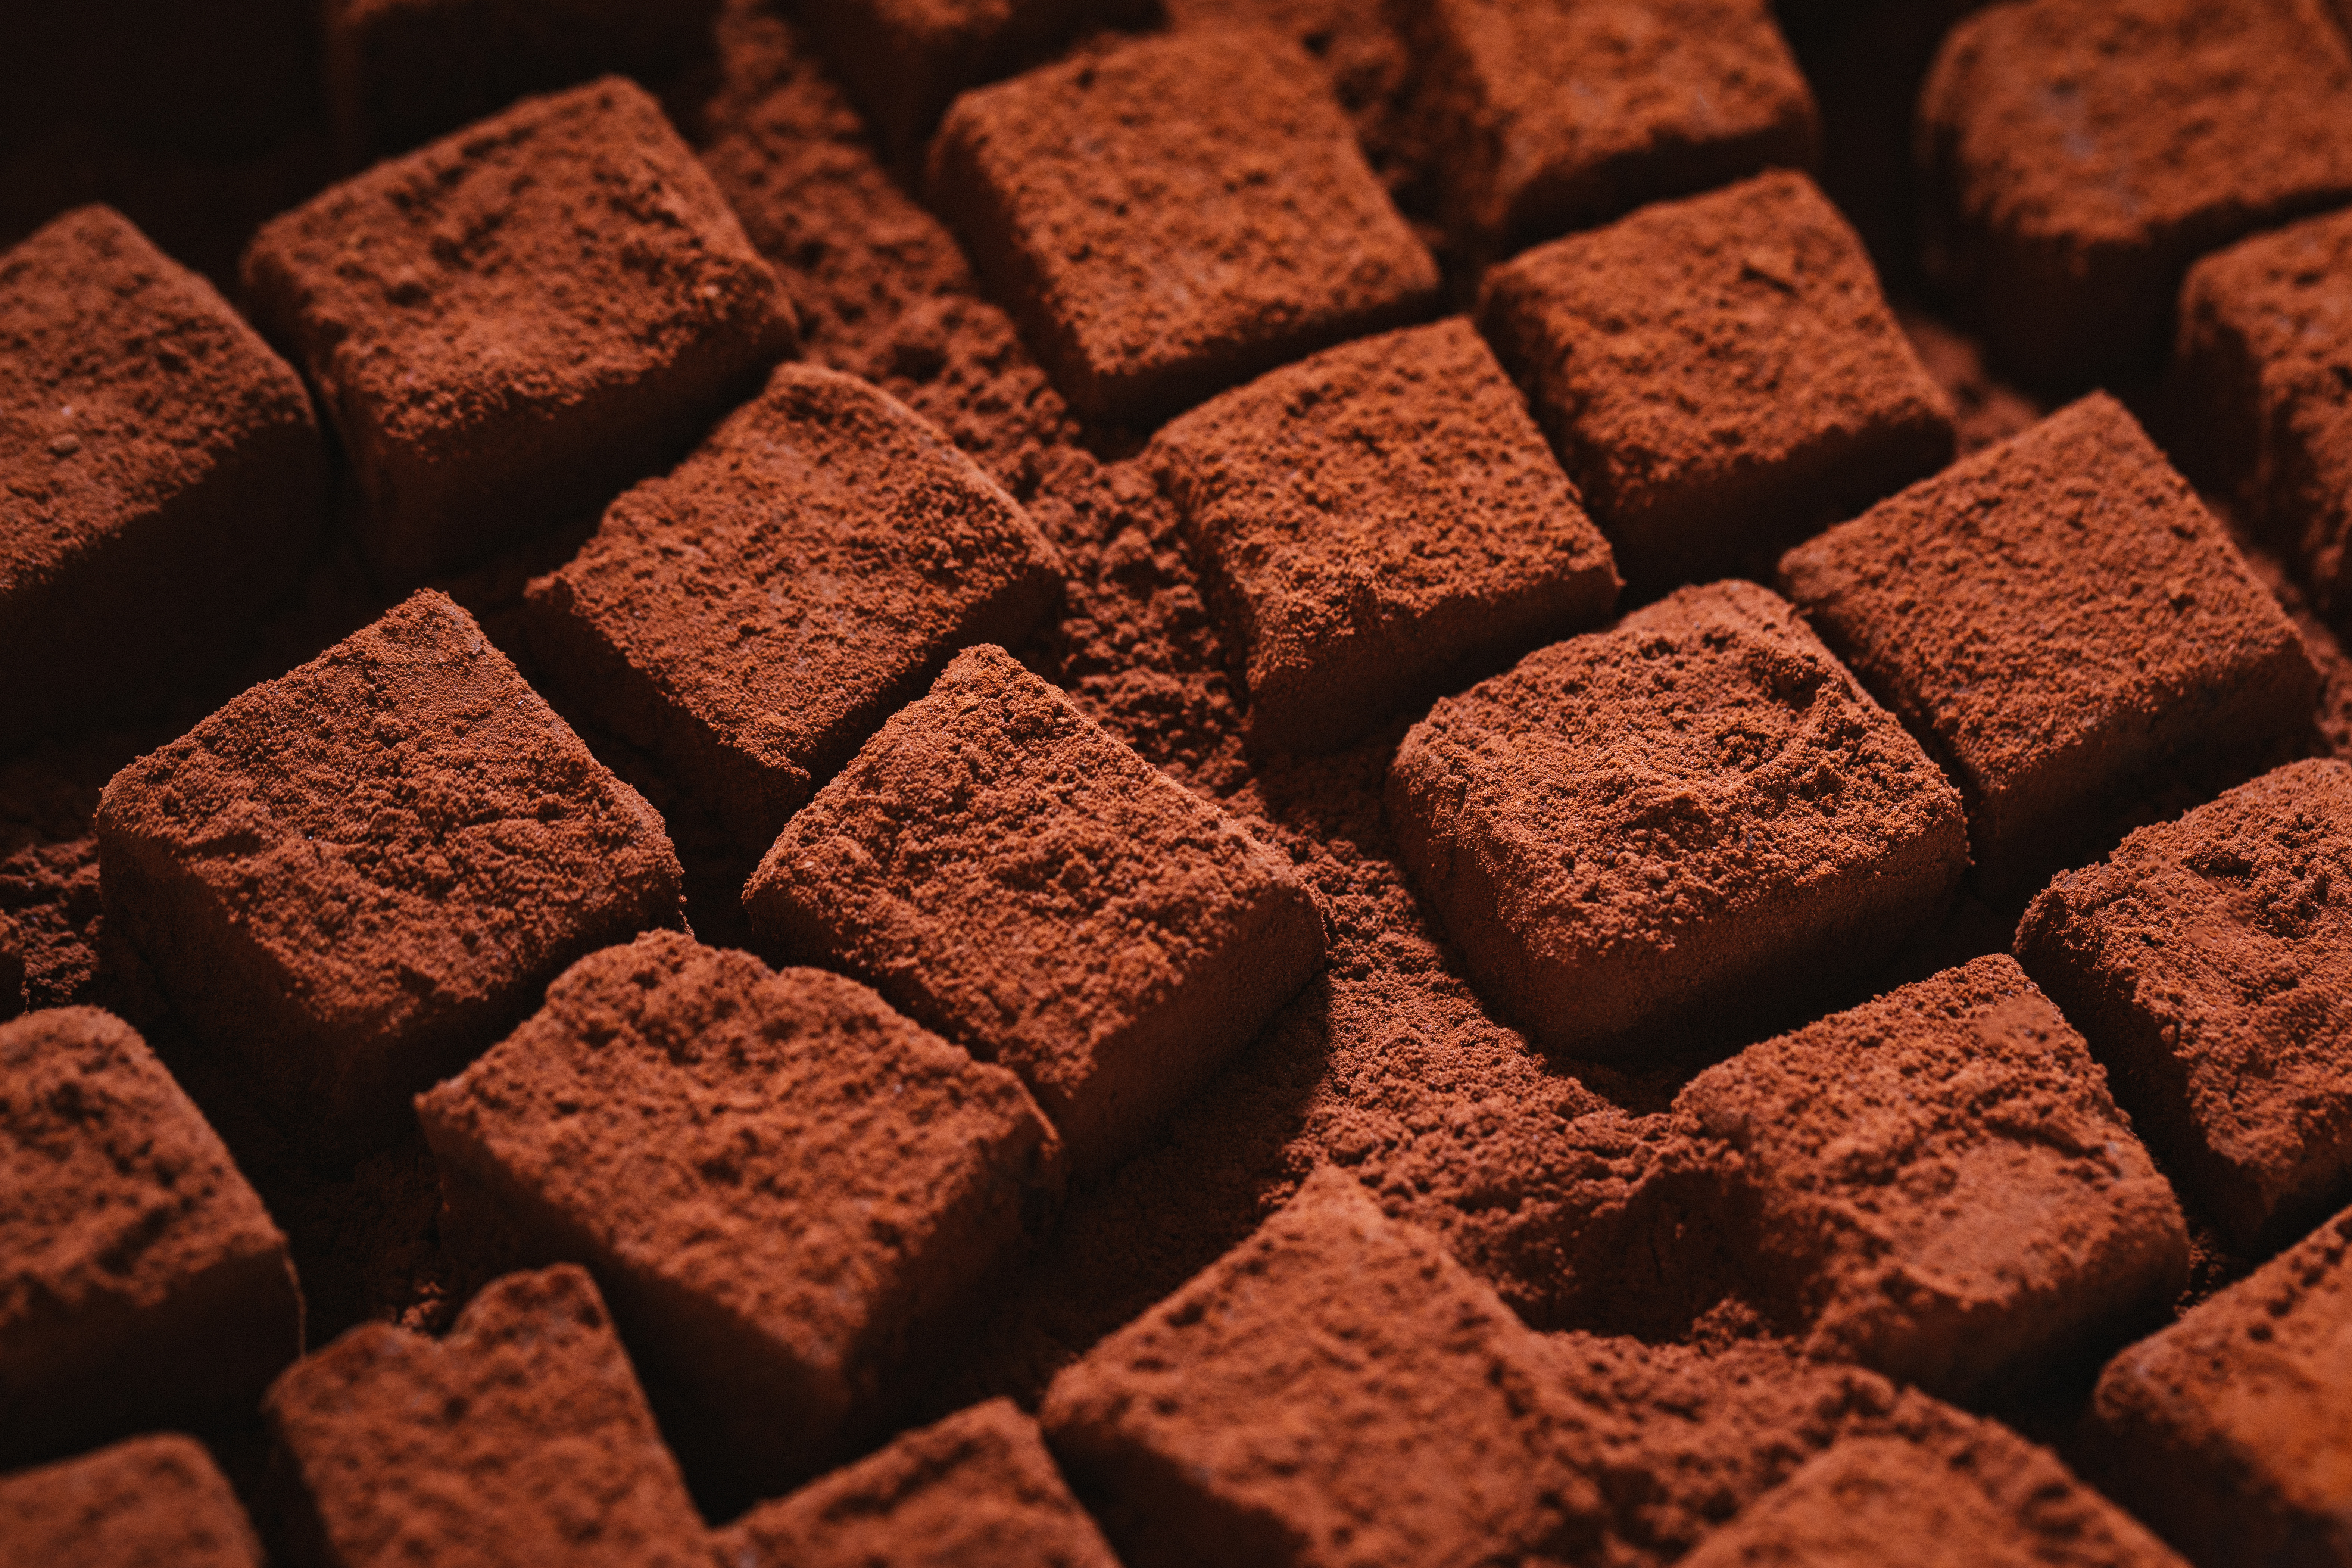 112392 download wallpaper chocolate, desert, macro, powder, cubes screensavers and pictures for free